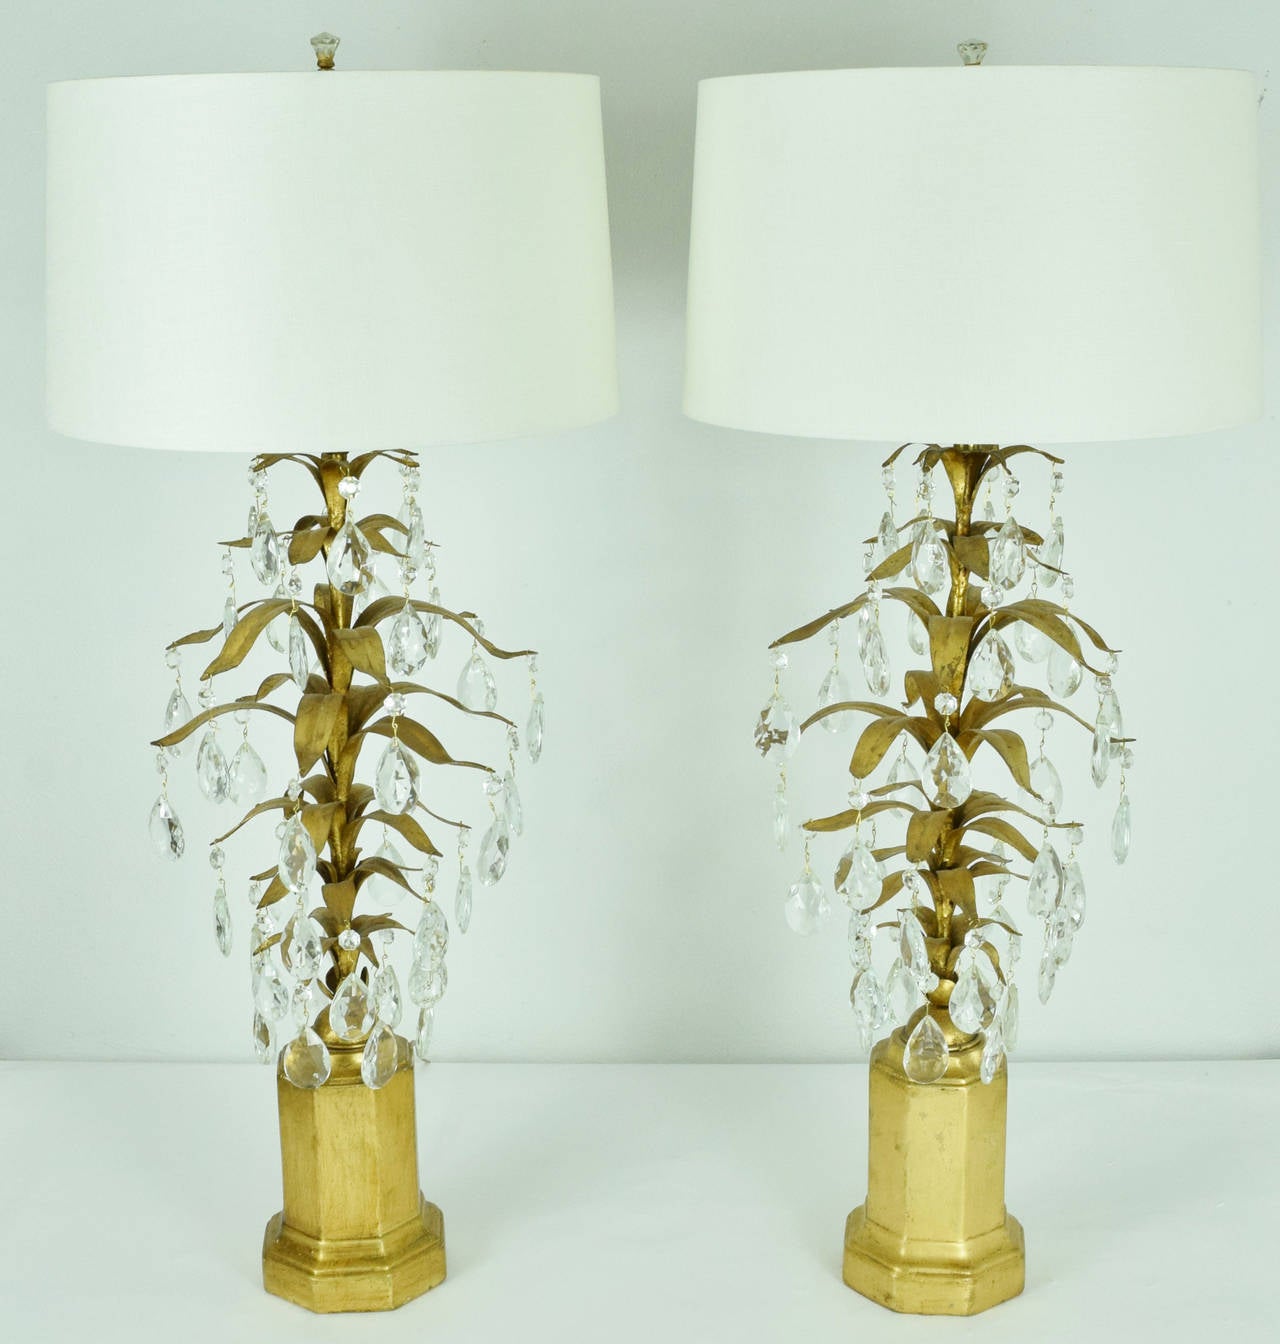 Interesting pair of Italian style gold finish lamps with crystals.